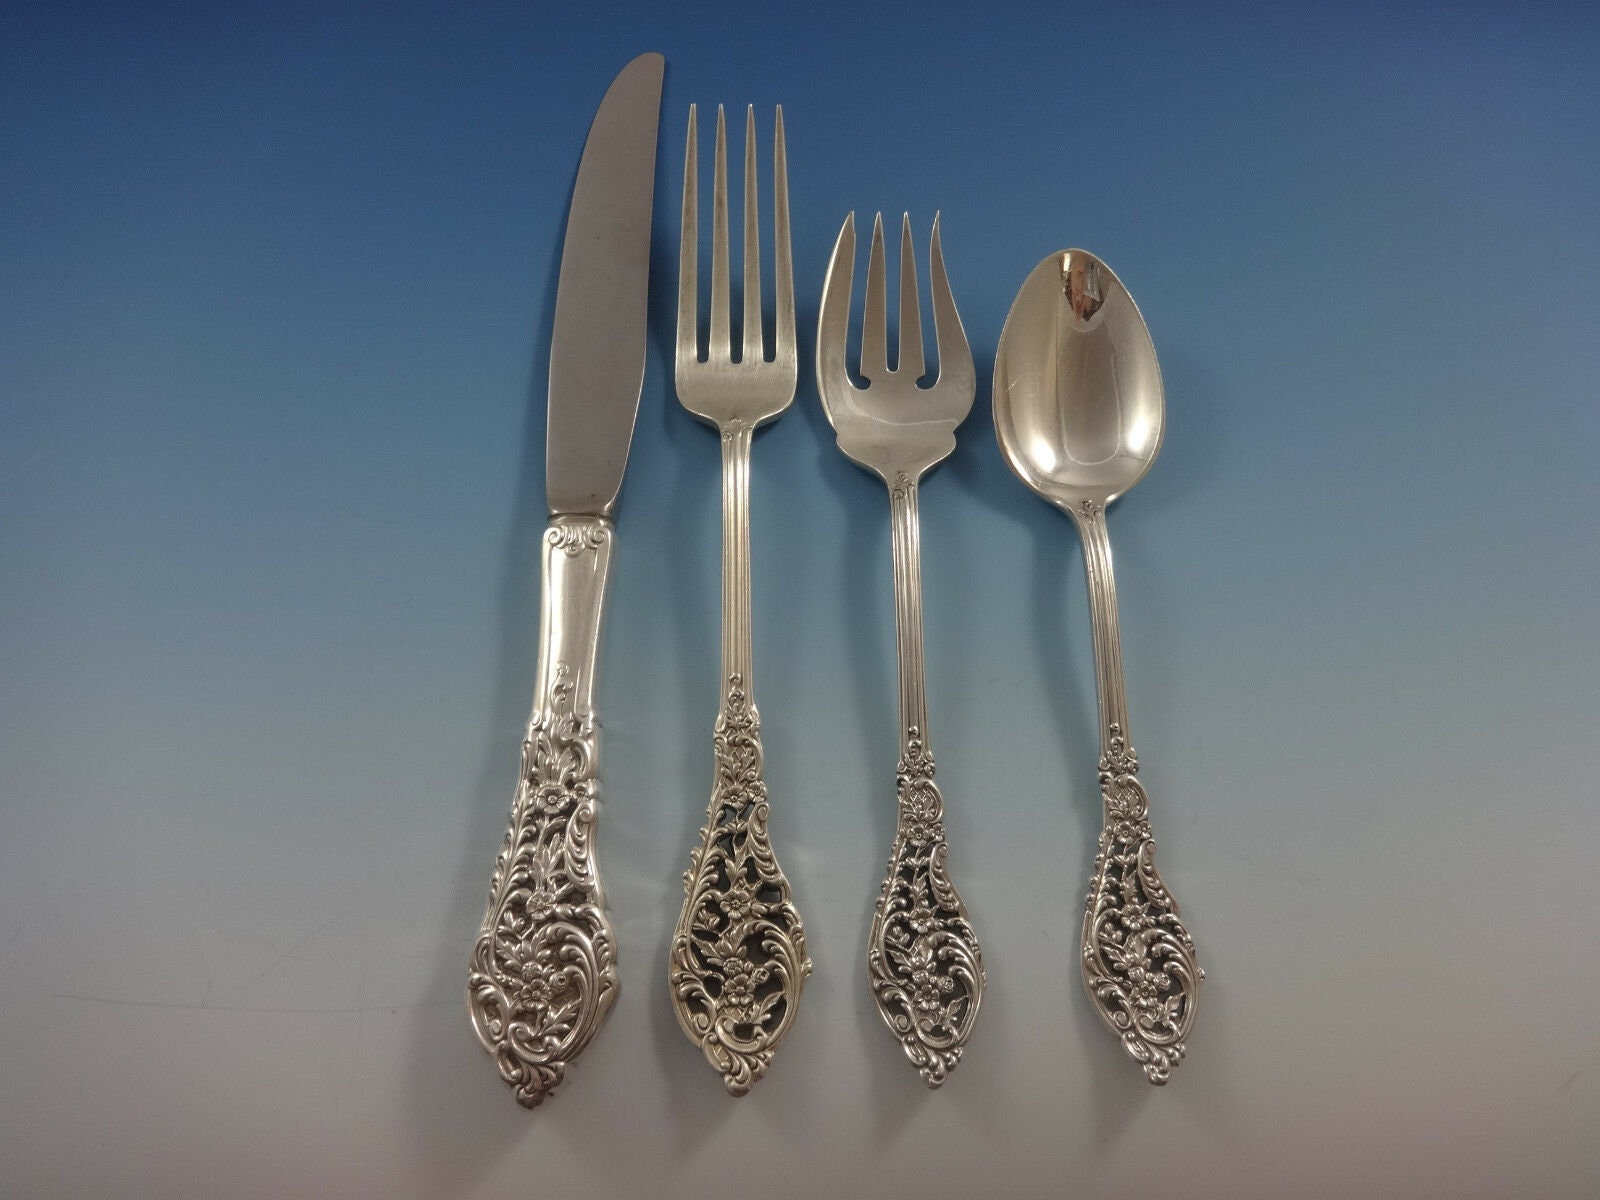 Florentine Lace by Reed & Barton 4 piece Place Setting Sterling Silver 